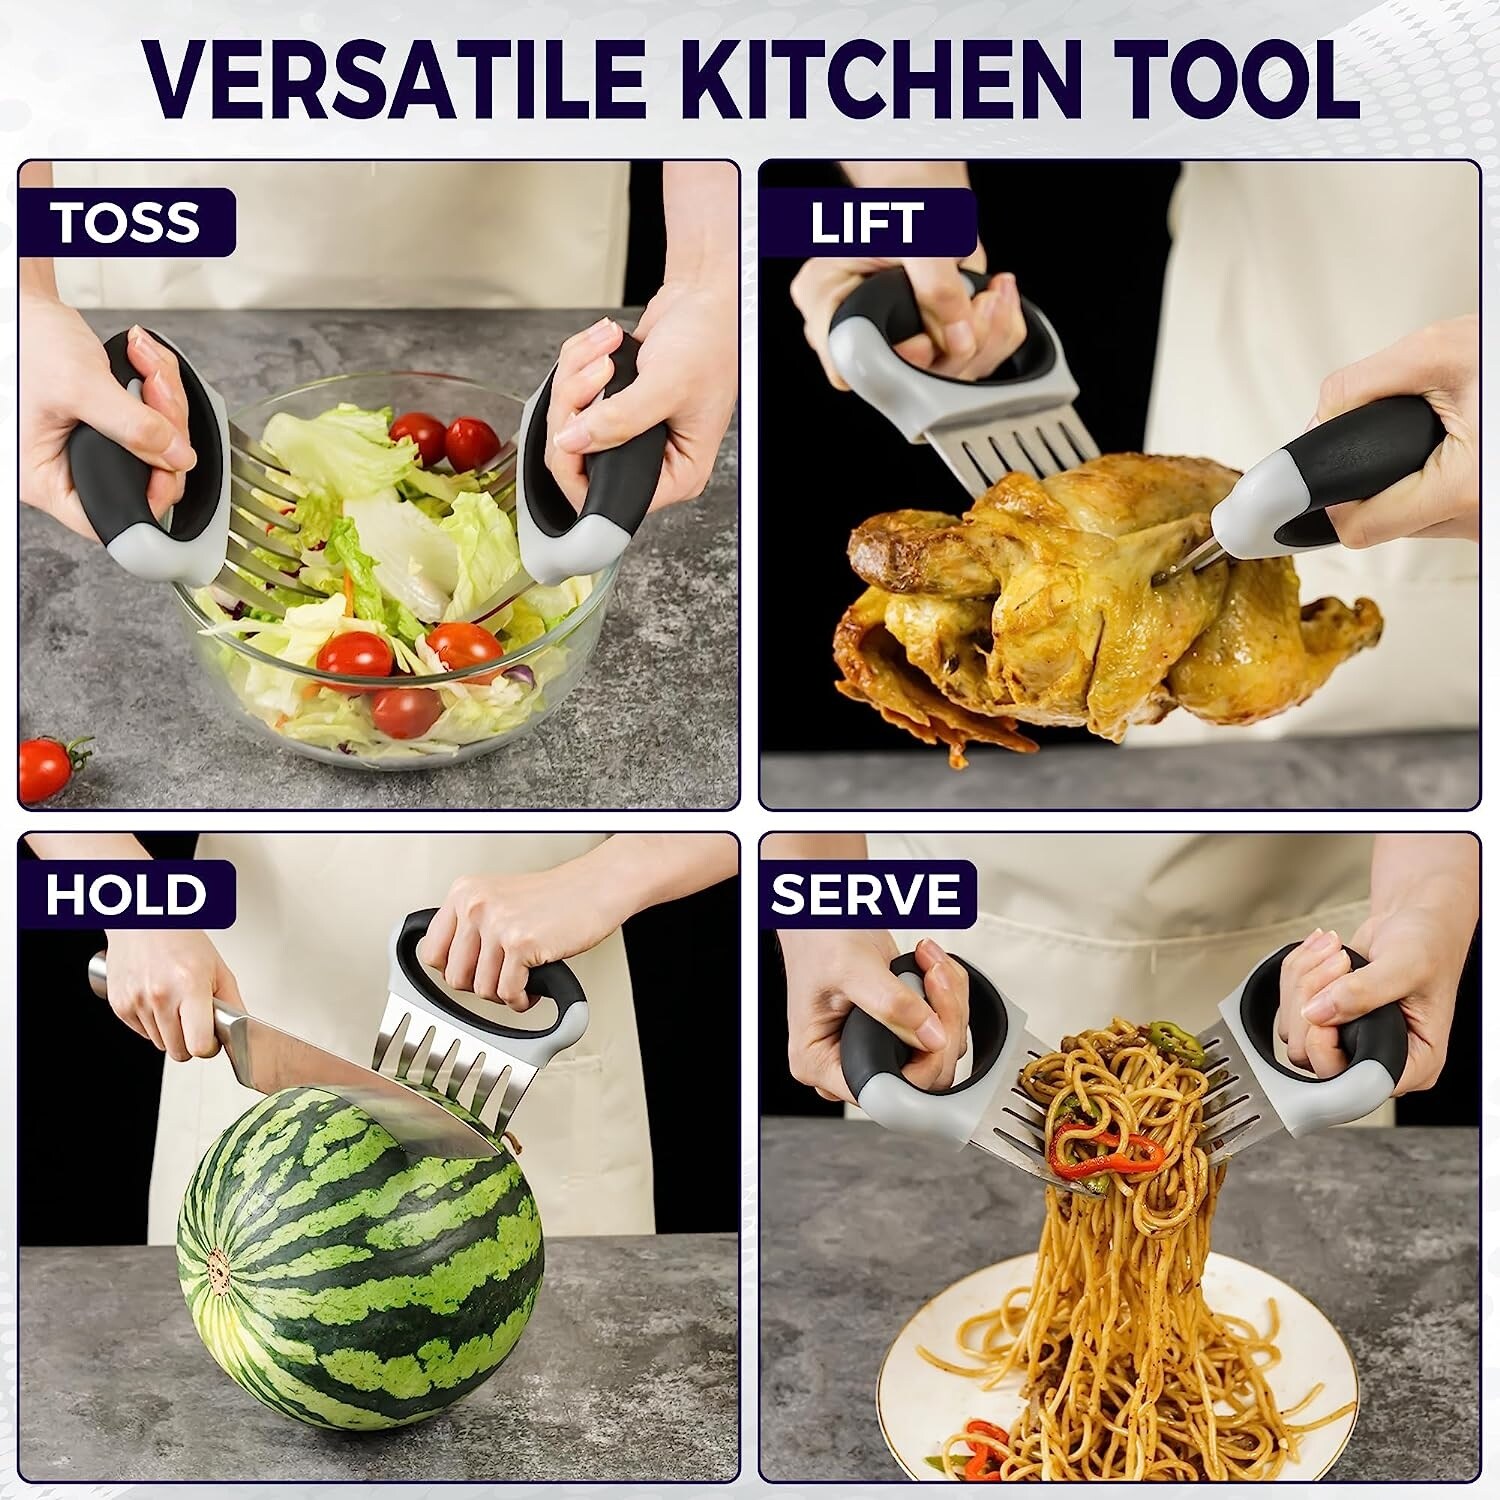 https://ak1.ostkcdn.com/images/products/is/images/direct/12d20f18e69a6fd9e665a4a004d9b662e550dd5c/CHEFSSPOT-Stainless-Steel-Meat-Shredder-Claws-with-Ultra-Sharp-Blades.jpg